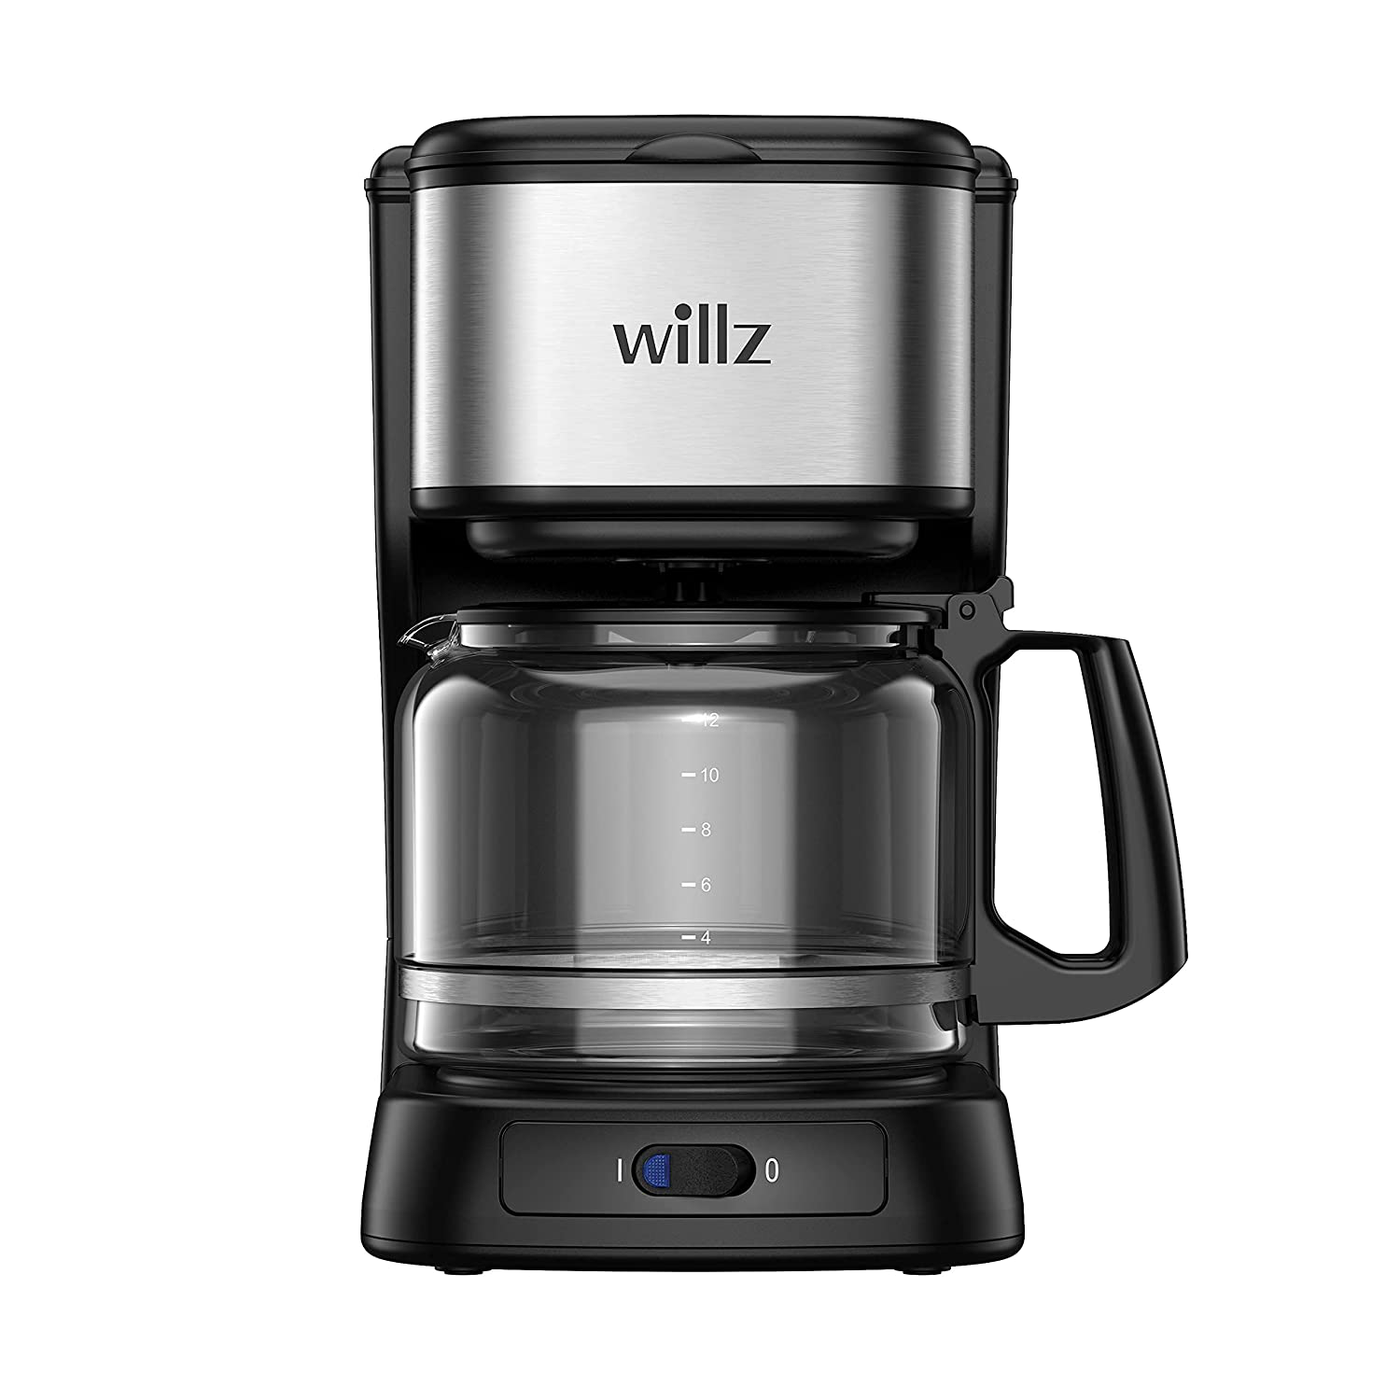 Willz 12-Cup Drip Coffee Maker with Removable Filter & Coffee Scoop, Black with Stainless Steel Trim (WLDC12BK09)